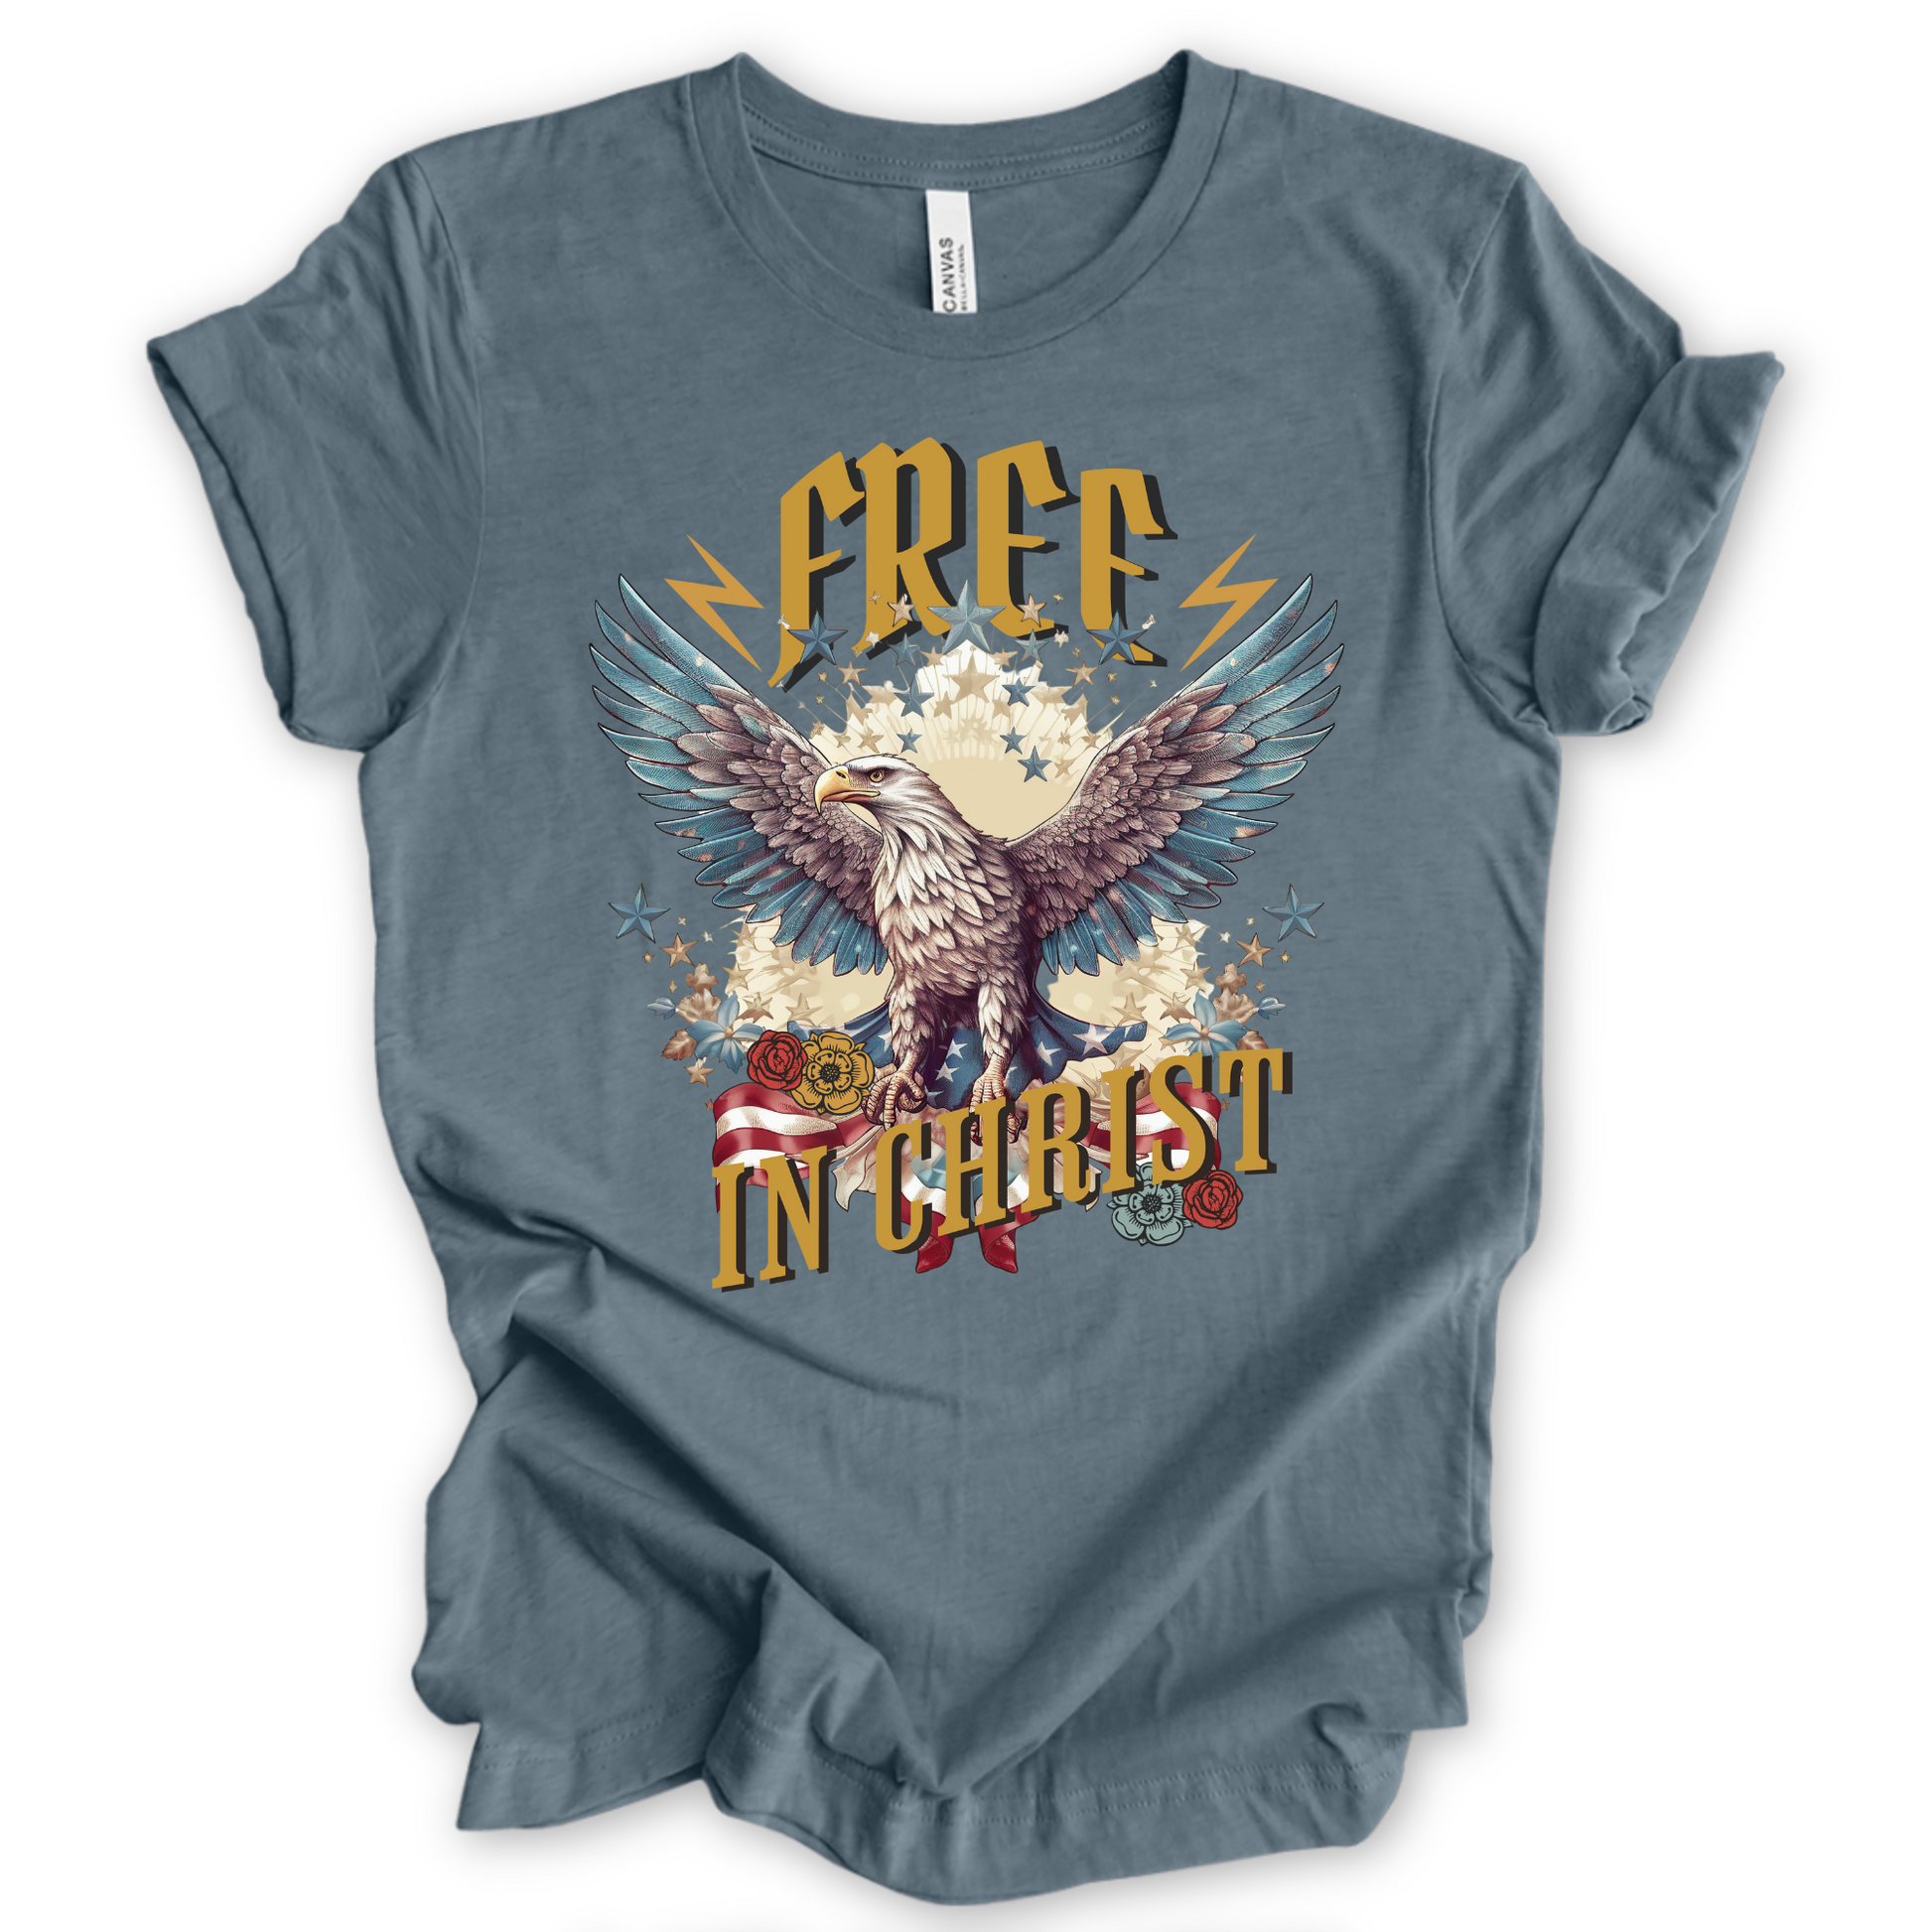 Free in Christ Tee features an oversized eagle with wings spread, American flag, lighting bolts and stars.  On a Heather storm color tshirt